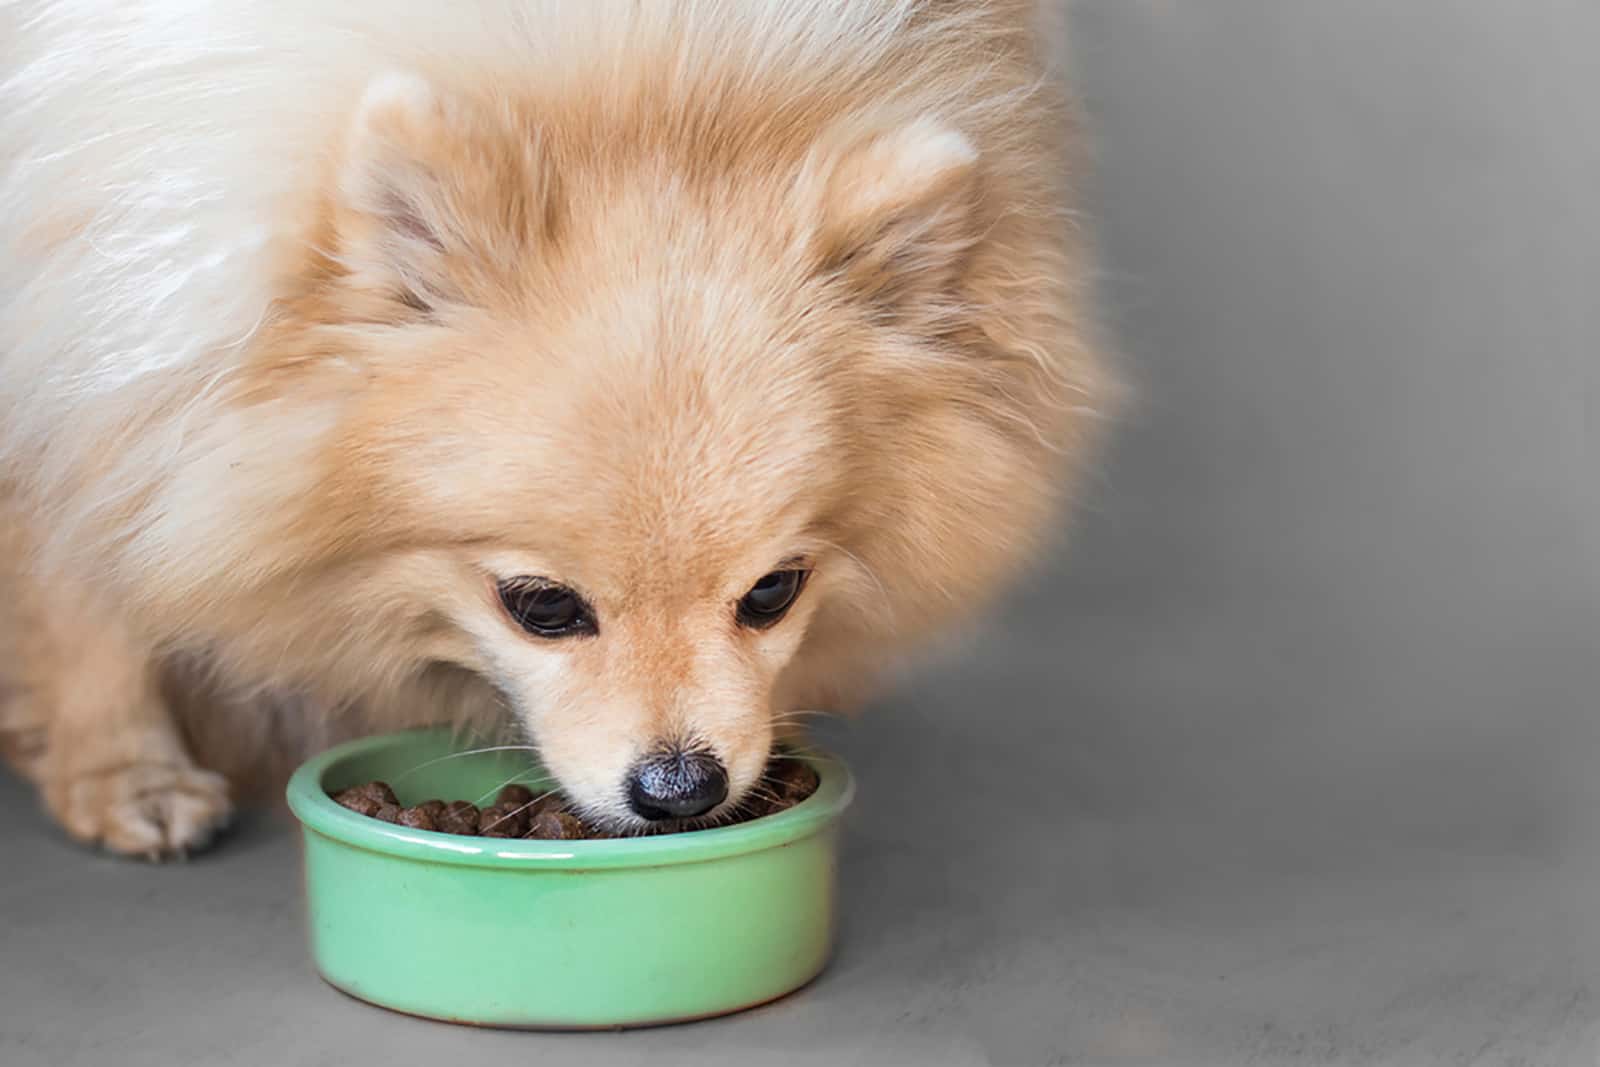 pomeranian dog eating from a green bowl